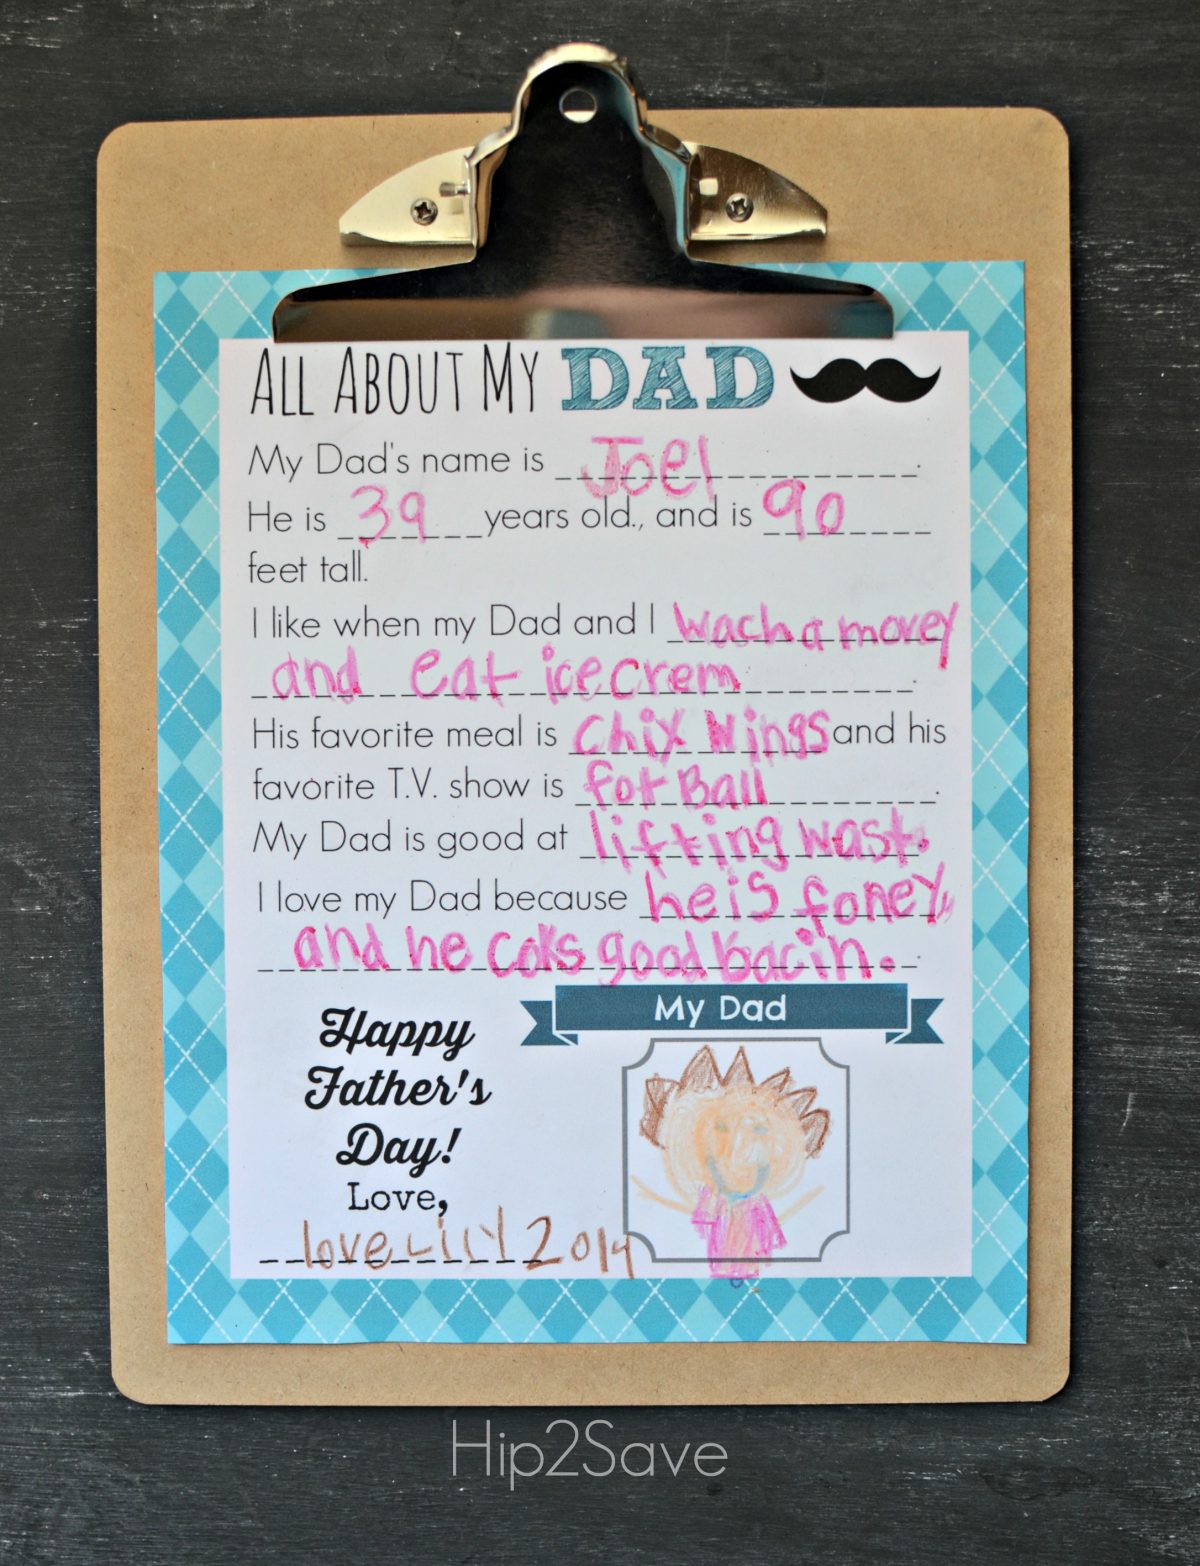 All About My Dad Free Father's Day Printable is one of Hip2Save's free father's day cards